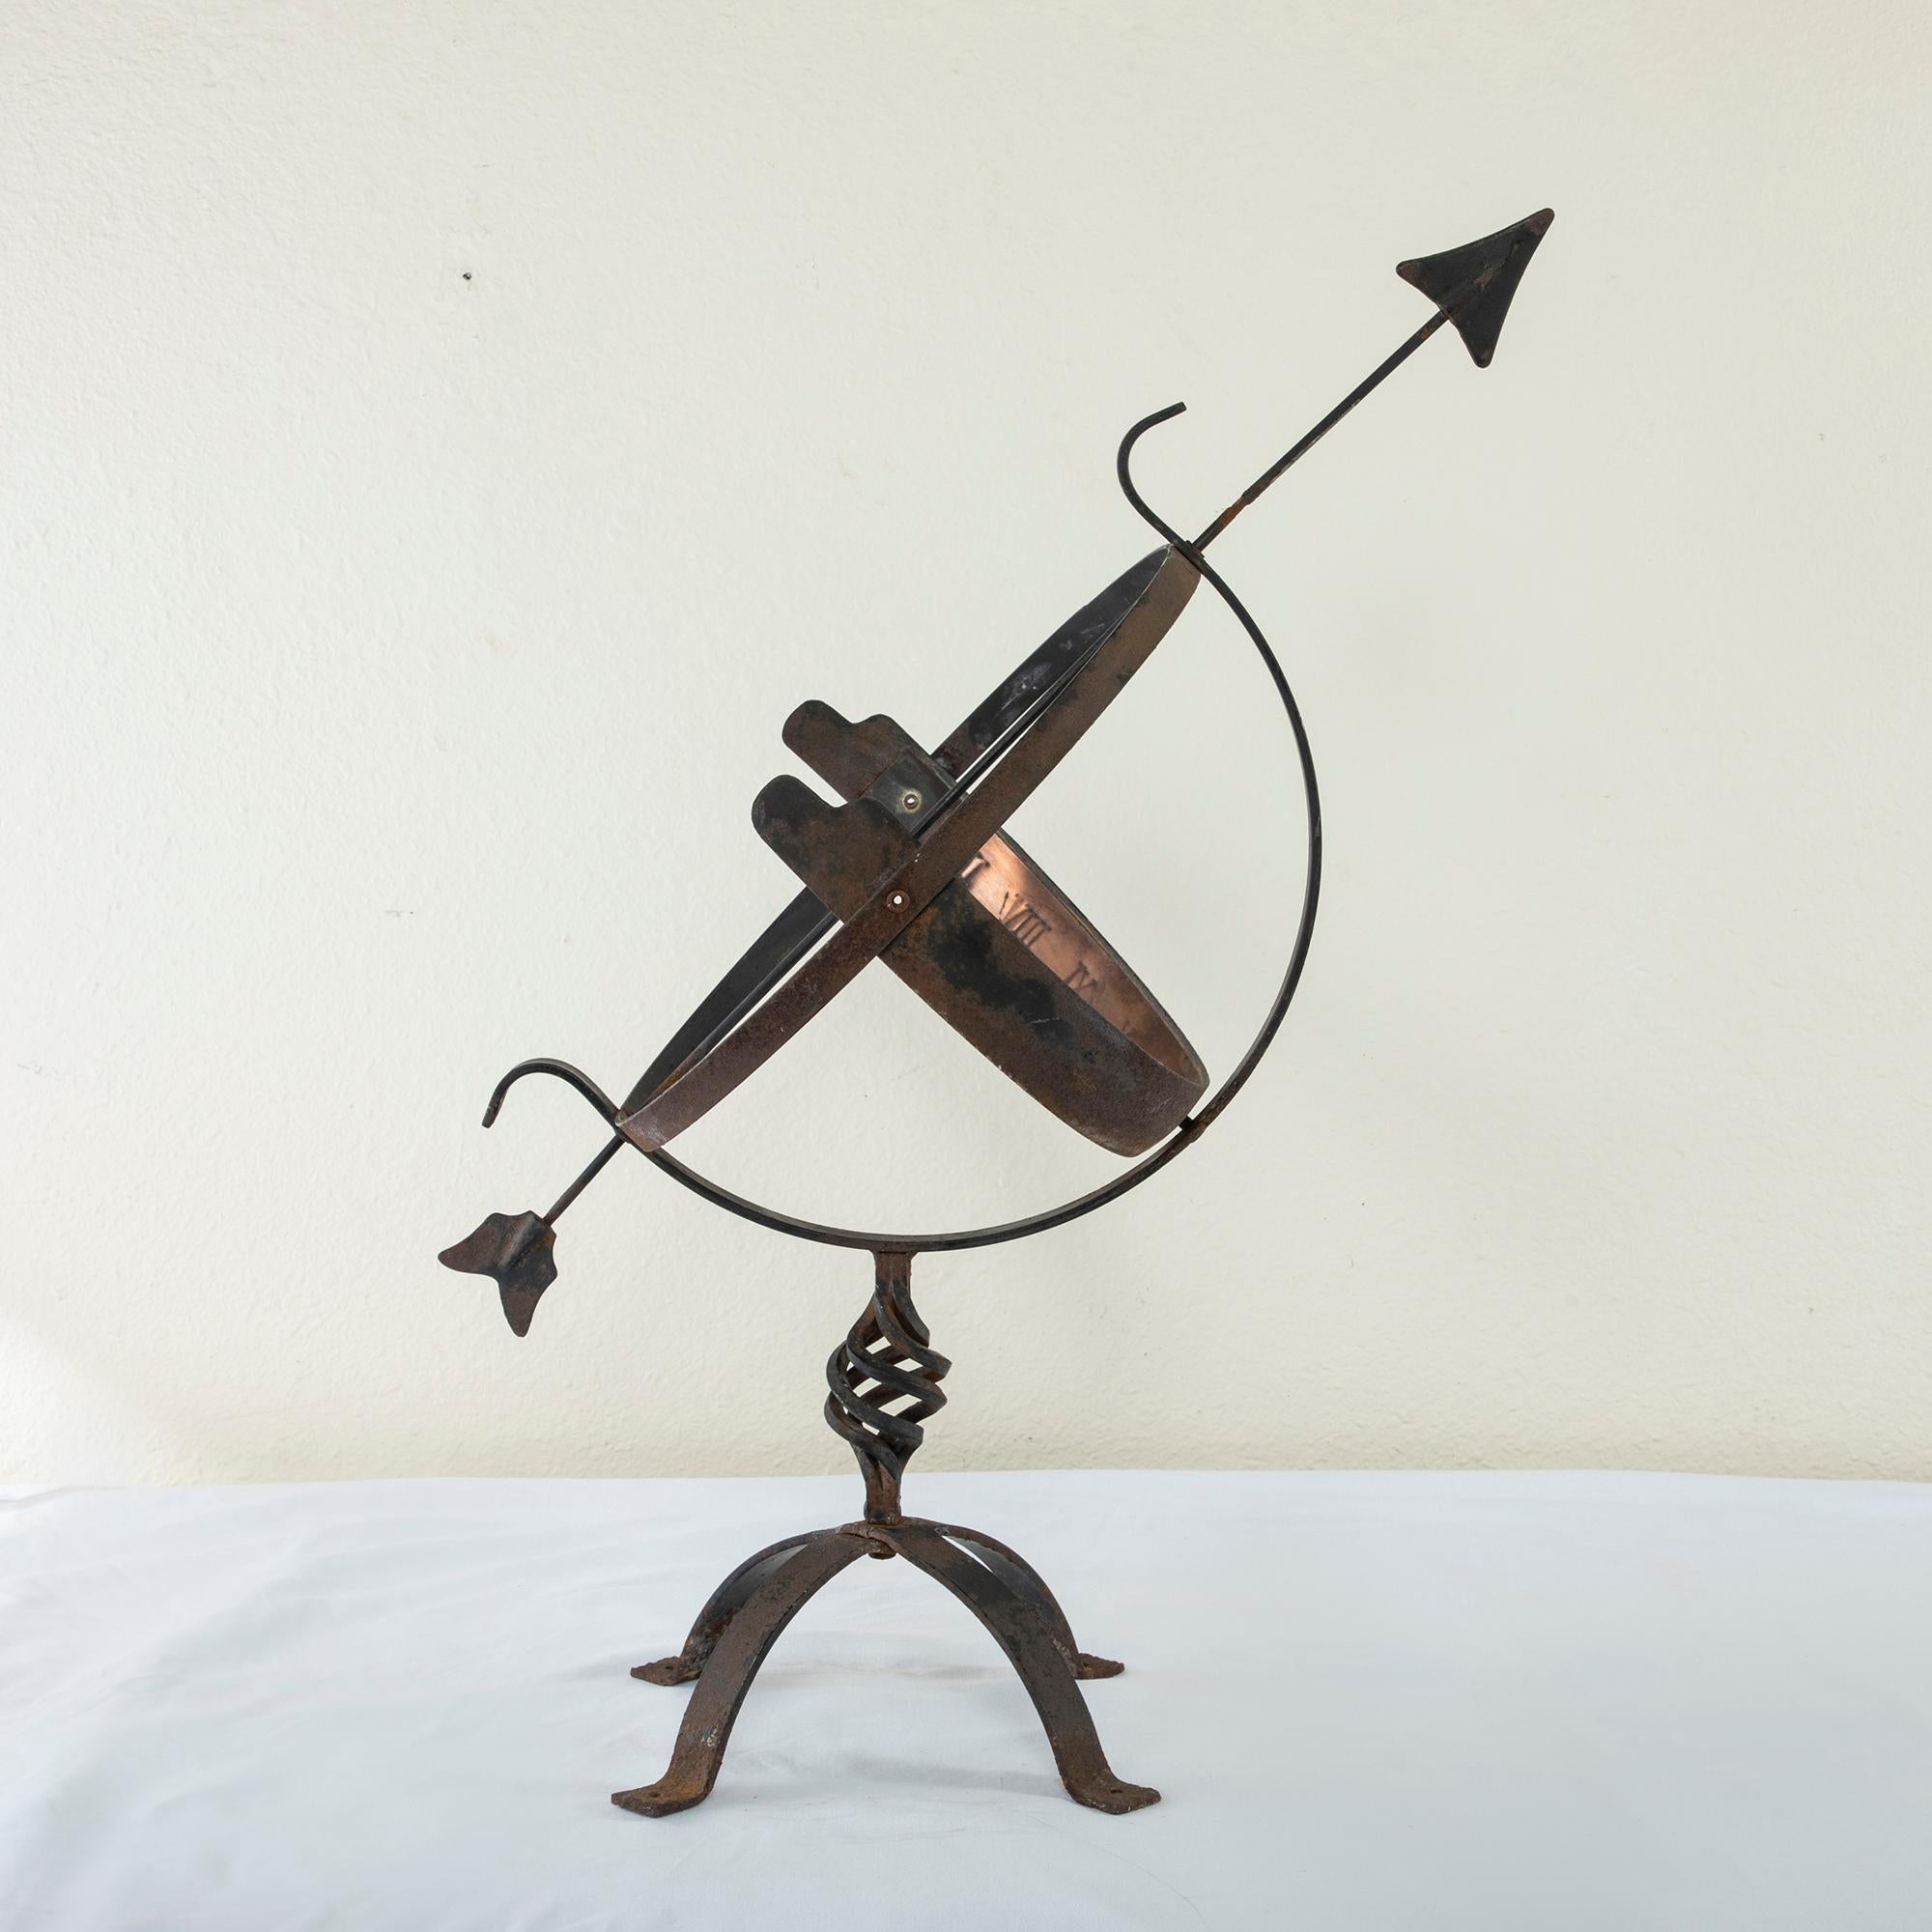 This large French armillary sphere and sundial is from the turn of the twentieth century and stands at 28.75 inches in height with a 15 inch diameter. It features an iron Stand with with a twisted wrought iron pillar. The sphere is fitted with an